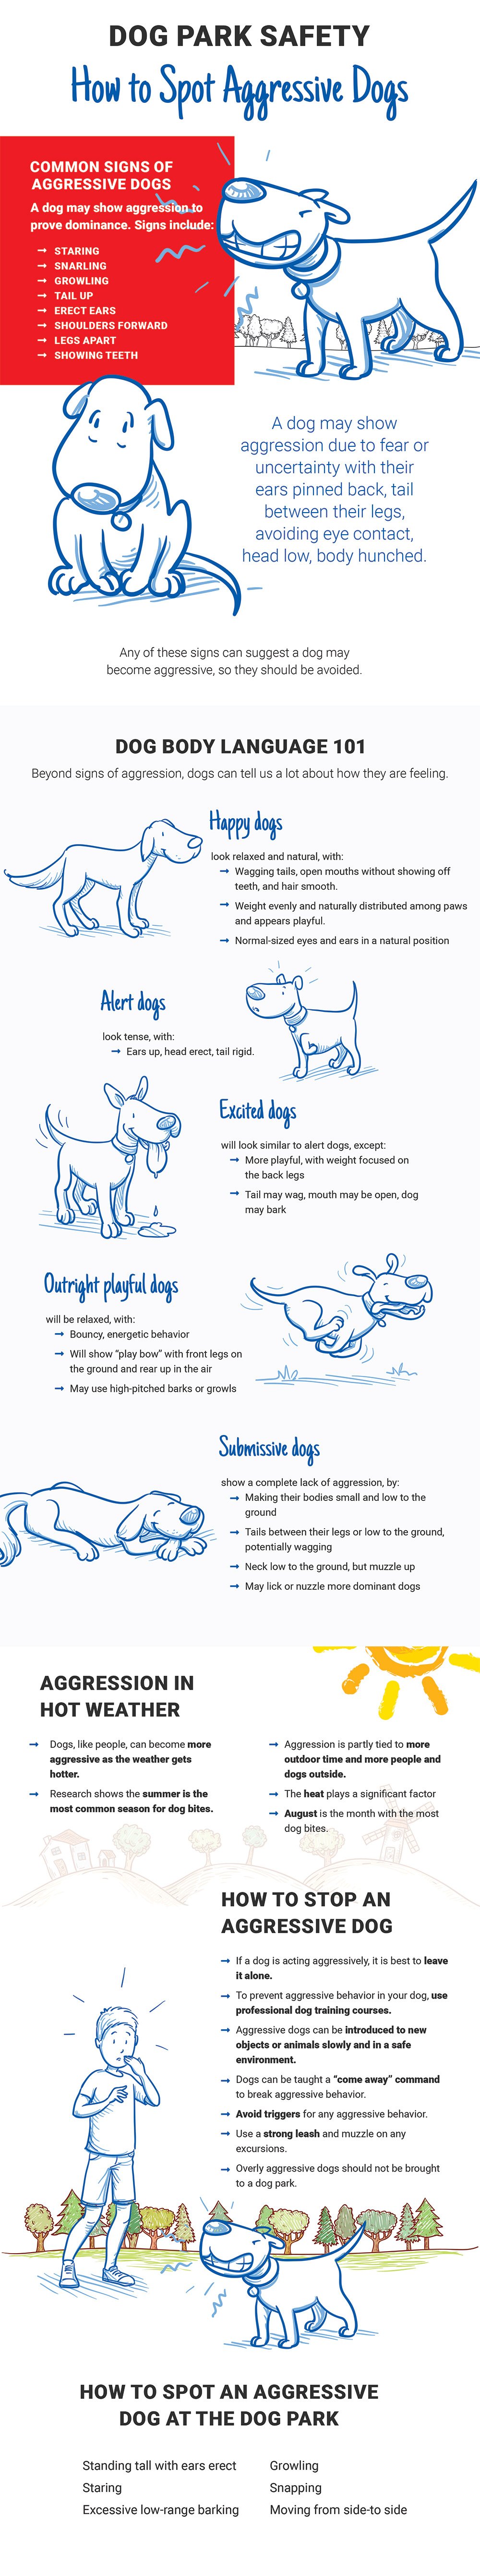 dog park safety infographic